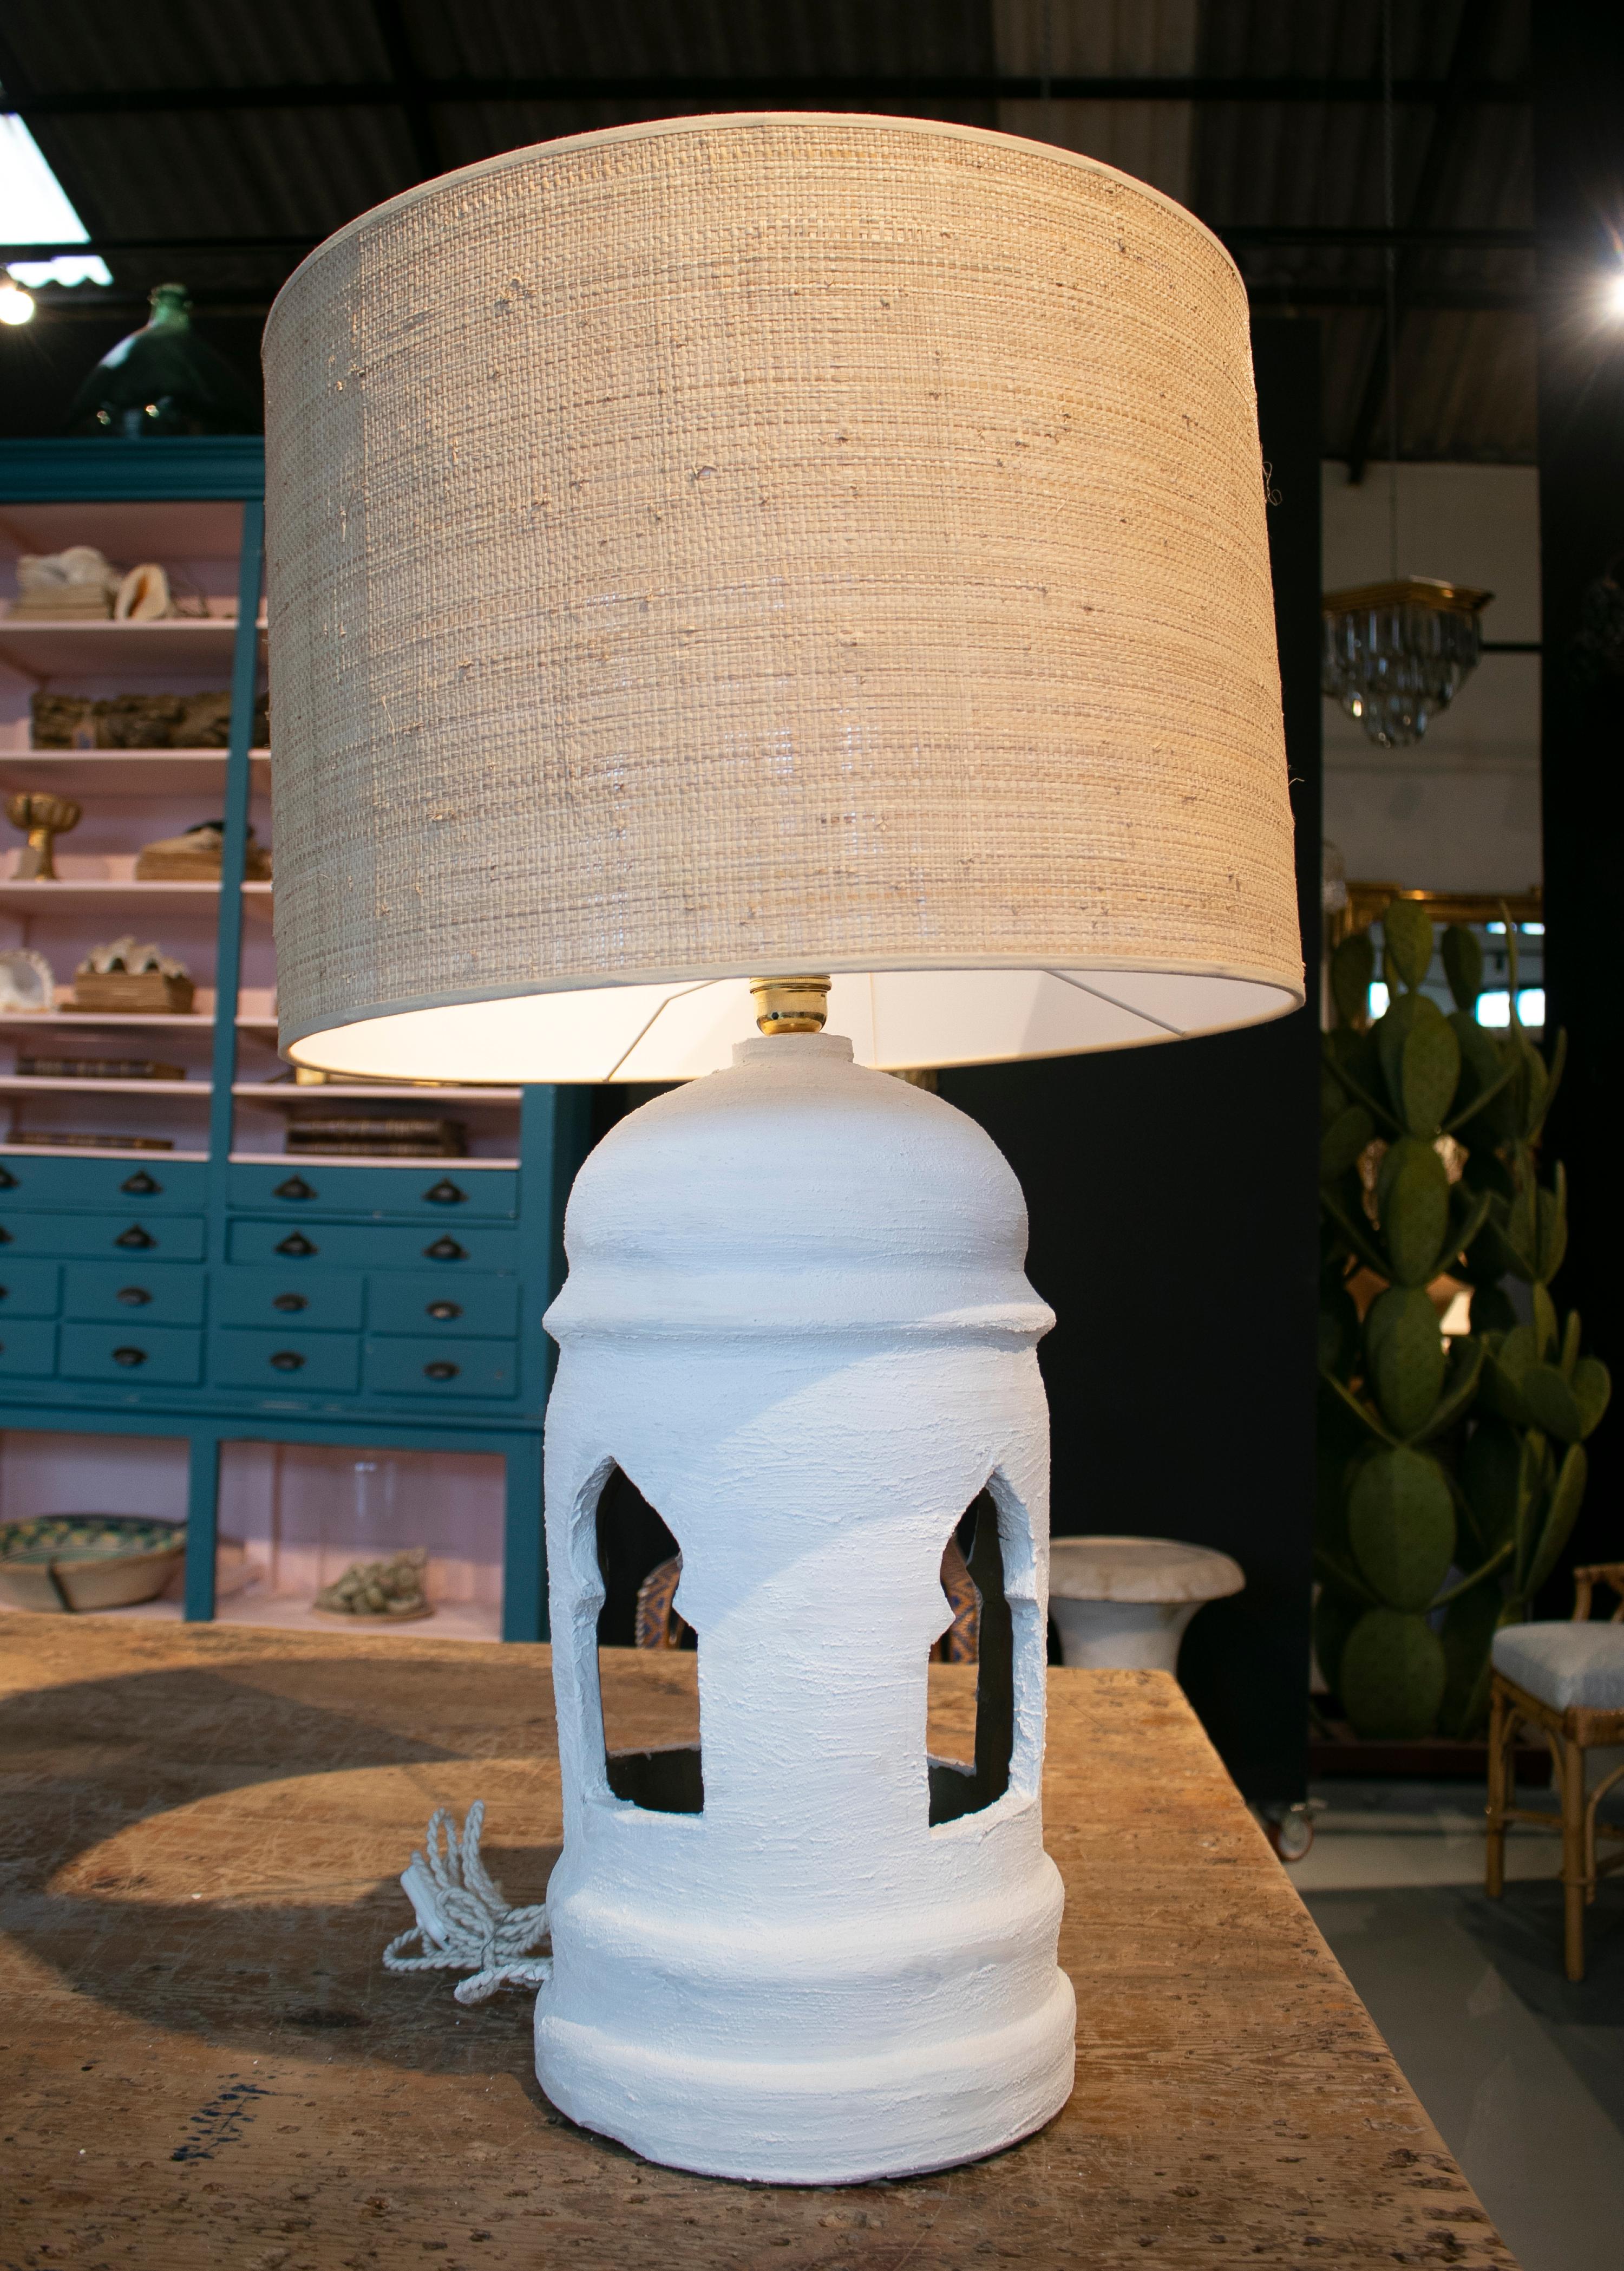 1970s pair of Spanish ceramic table lamps painted in chalk white.
Shade not included
Total height without shade 52cm.